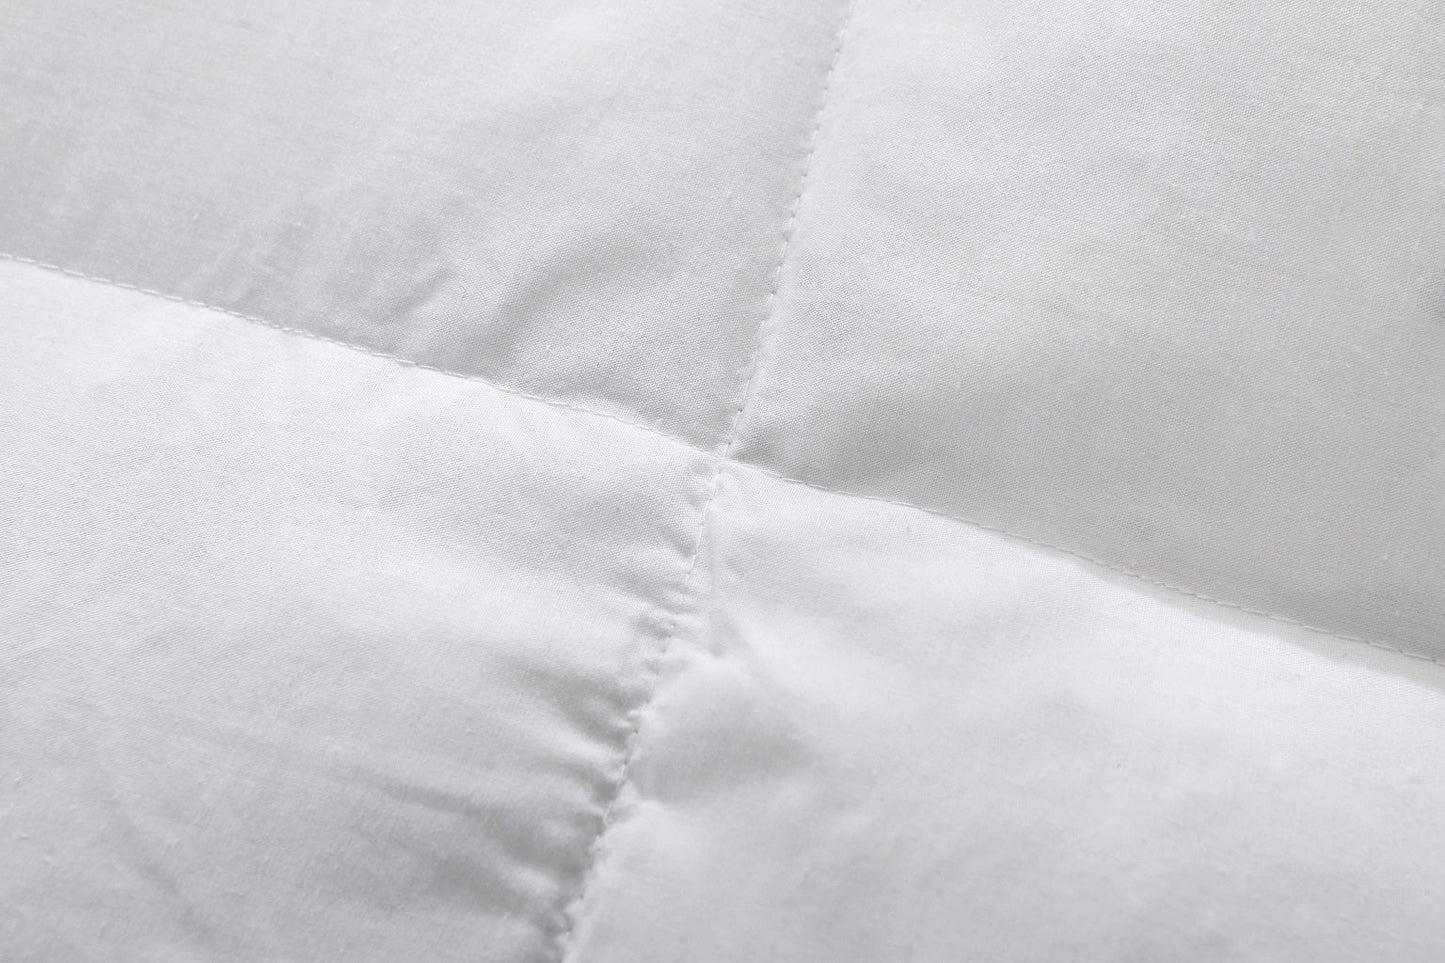 10.5 Tog Duck Feather & Down Duvets With Polyester Microfiber Cover - TheComfortshop.co.ukDuvet0721718954897thecomfortshopTheComfortshop.co.uk10.5-Duck-Feather-Down-Duvet-Microfiber-Cover-SuperkingSuperking10.5 Tog Duck Feather & Down Duvets With Polyester Microfiber Cover - TheComfortshop.co.uk